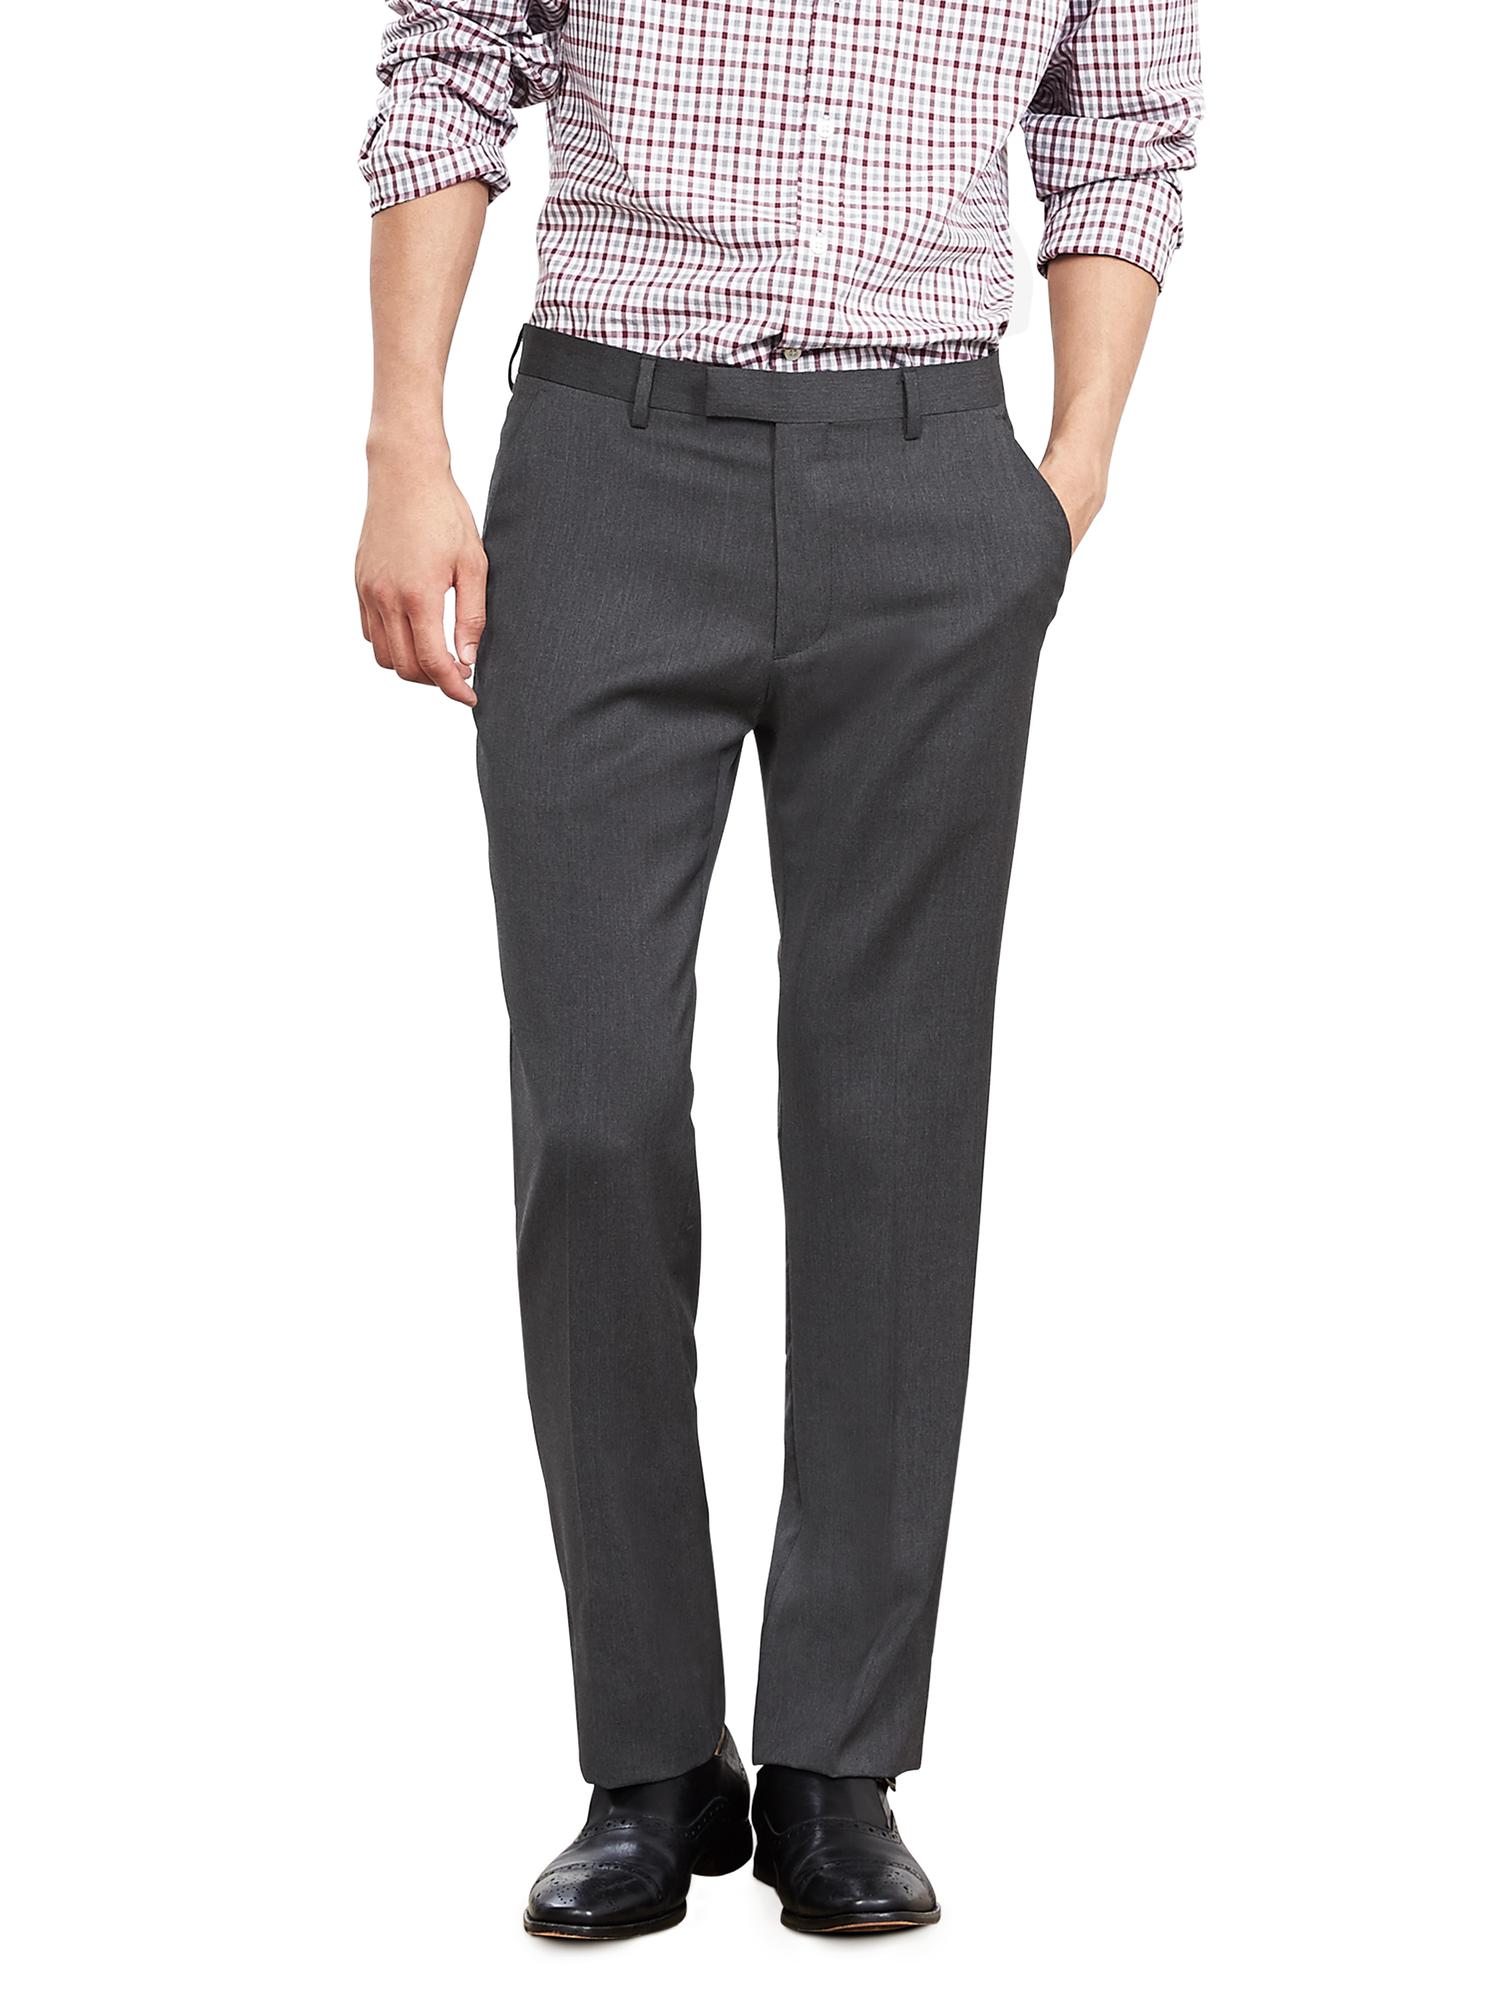 Tailored Slim Charcoal Italian Wool Suit Trouser